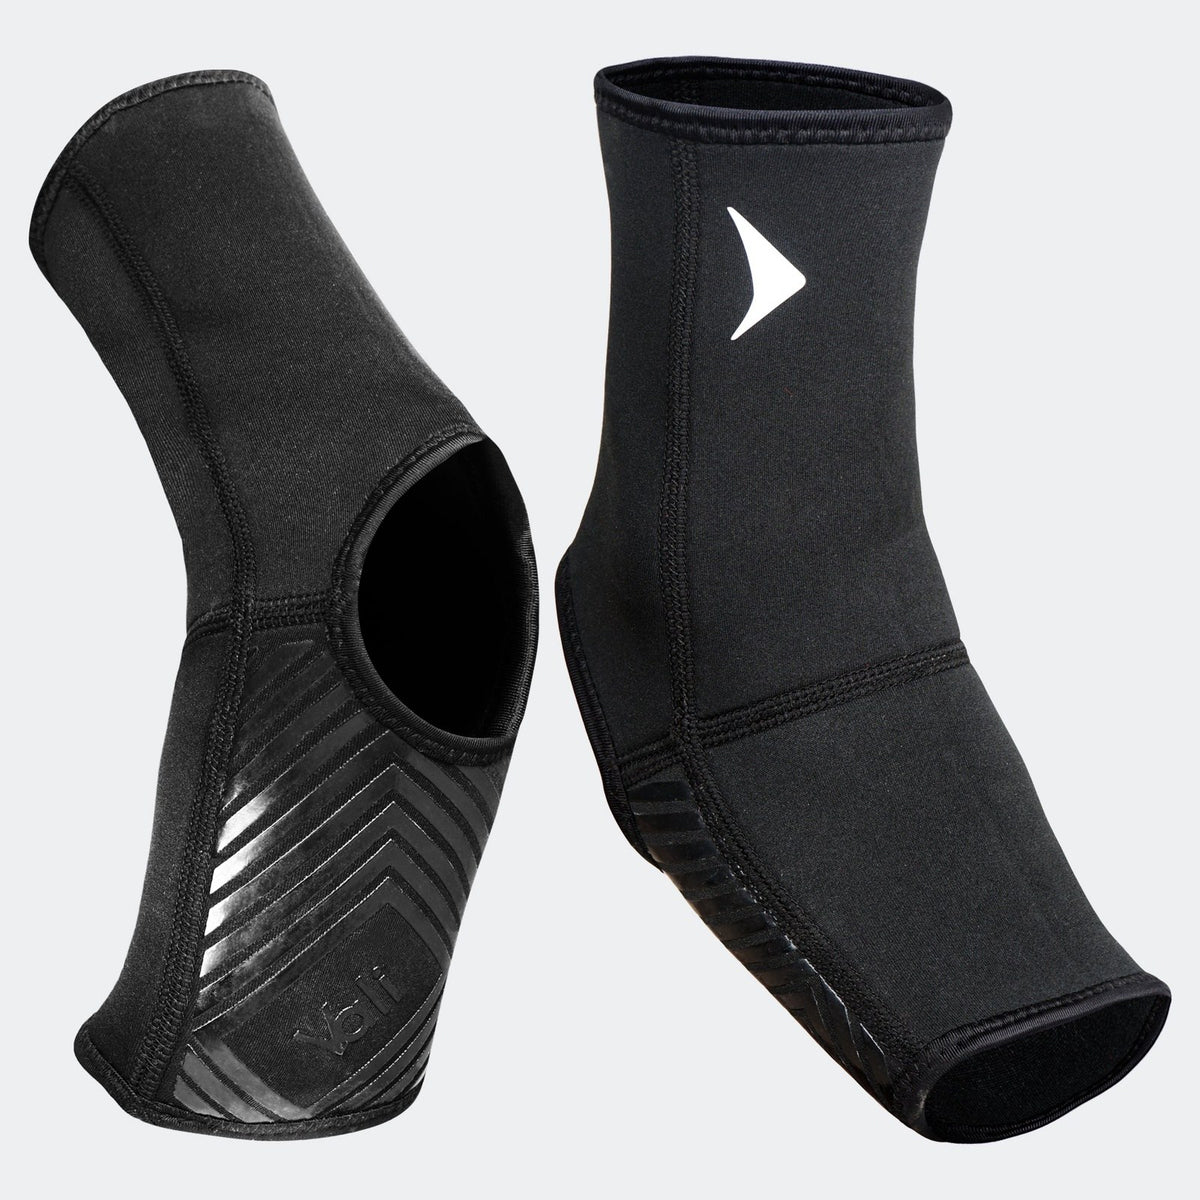 Nista Foot Grips Ankle Support For Training MMA